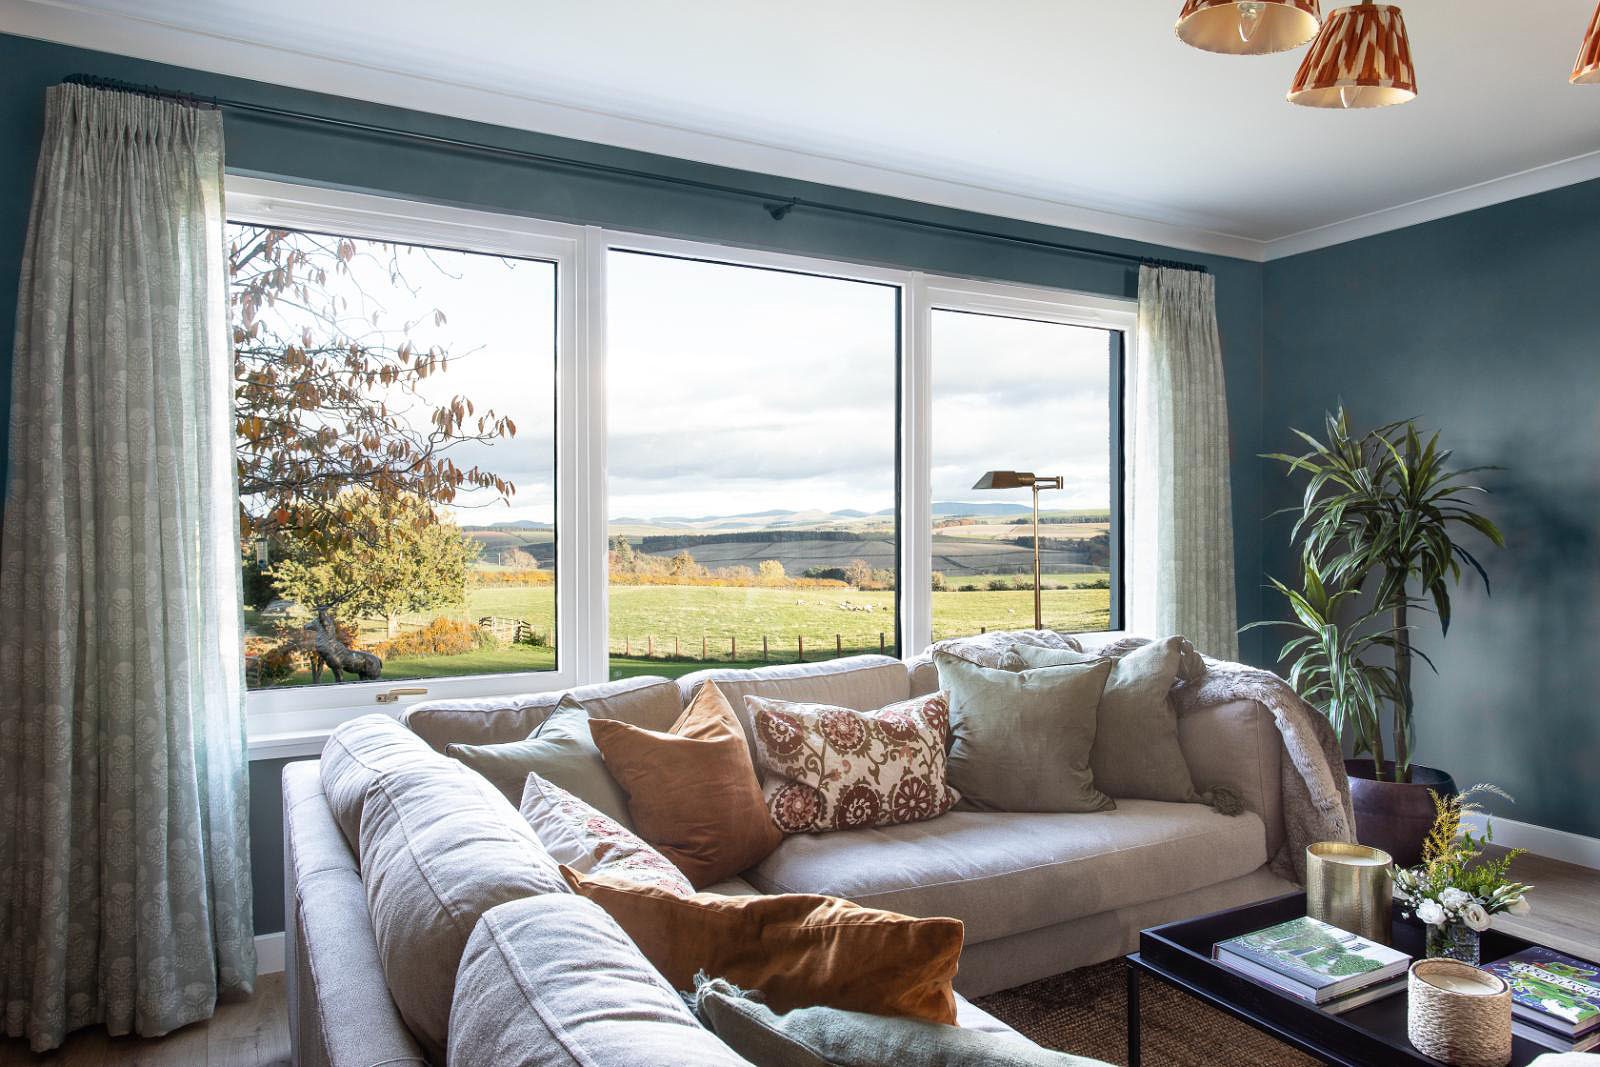 Overthickside - relax on the large corner sofa while enjoying countryside views